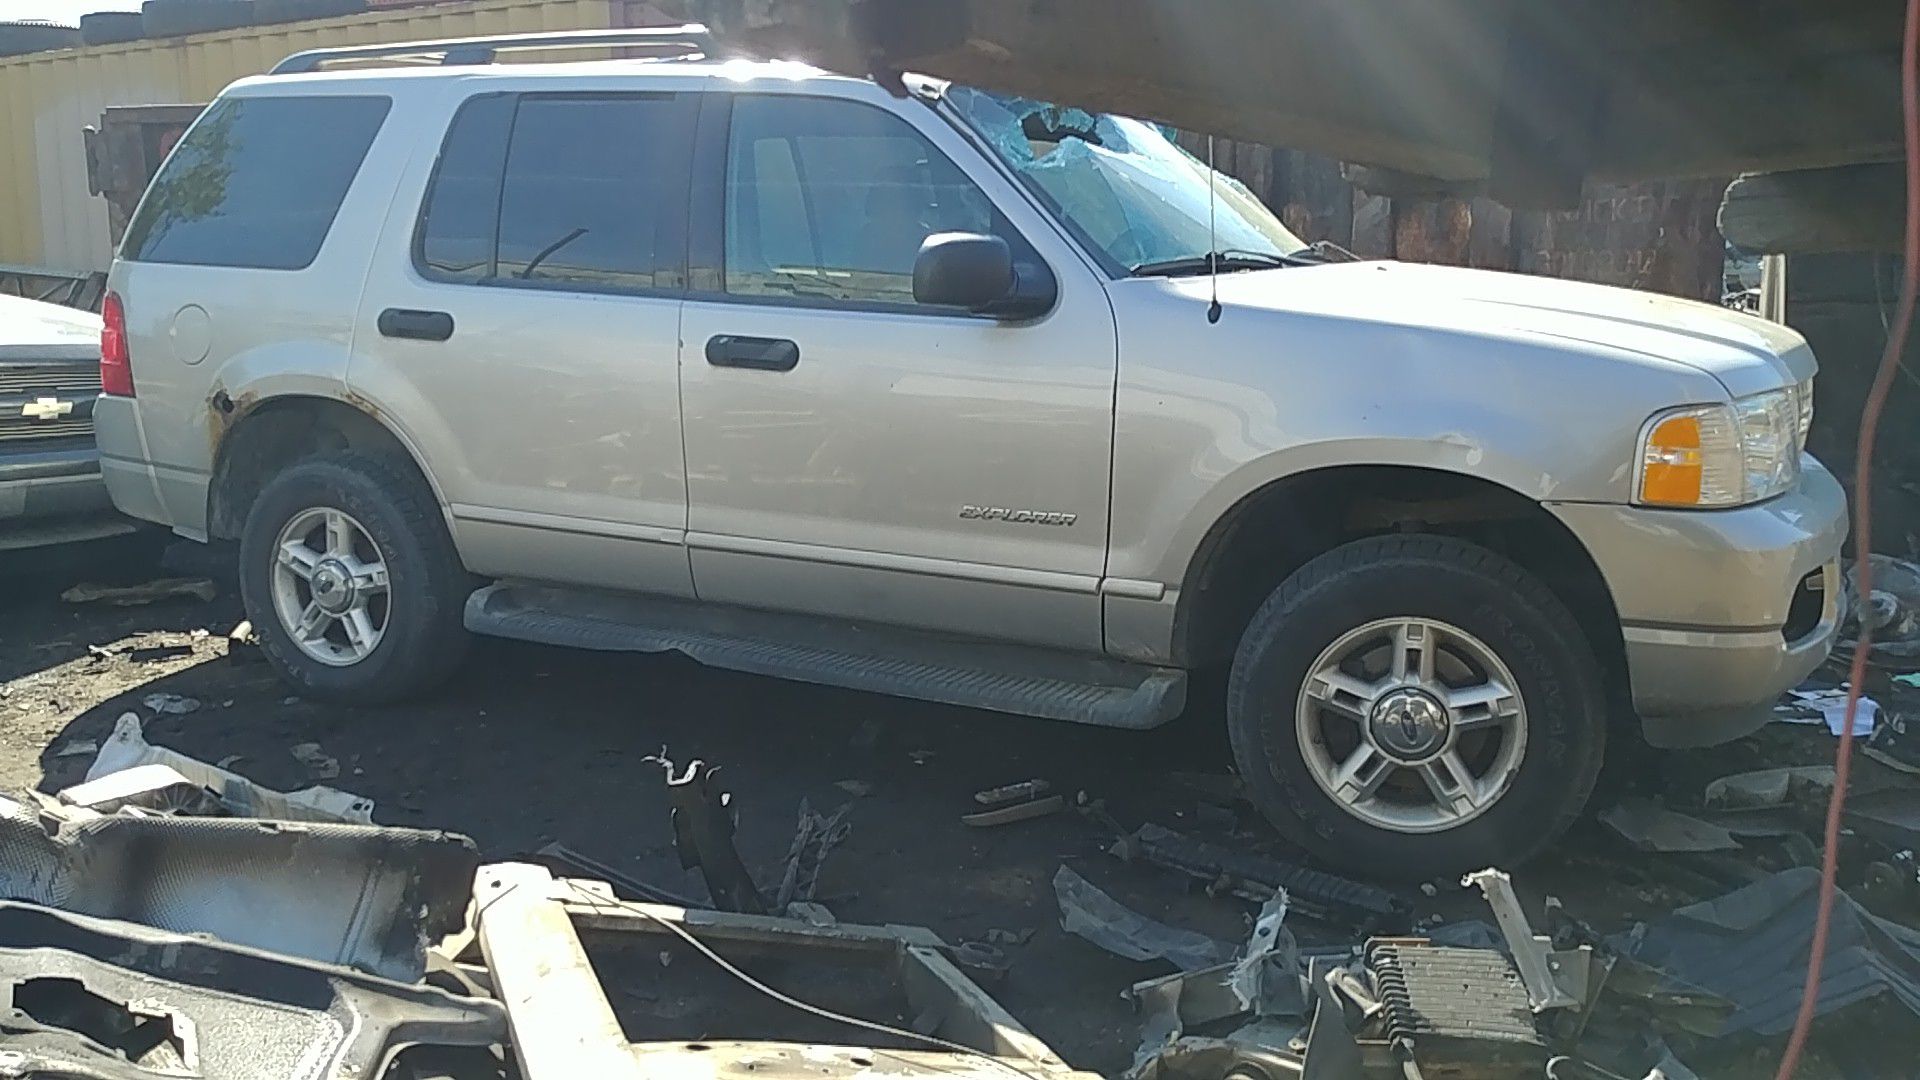 Now open Saturday's . 2004 Ford Explorer 4x4 4.0L Parts only. U pull it yard cash only.